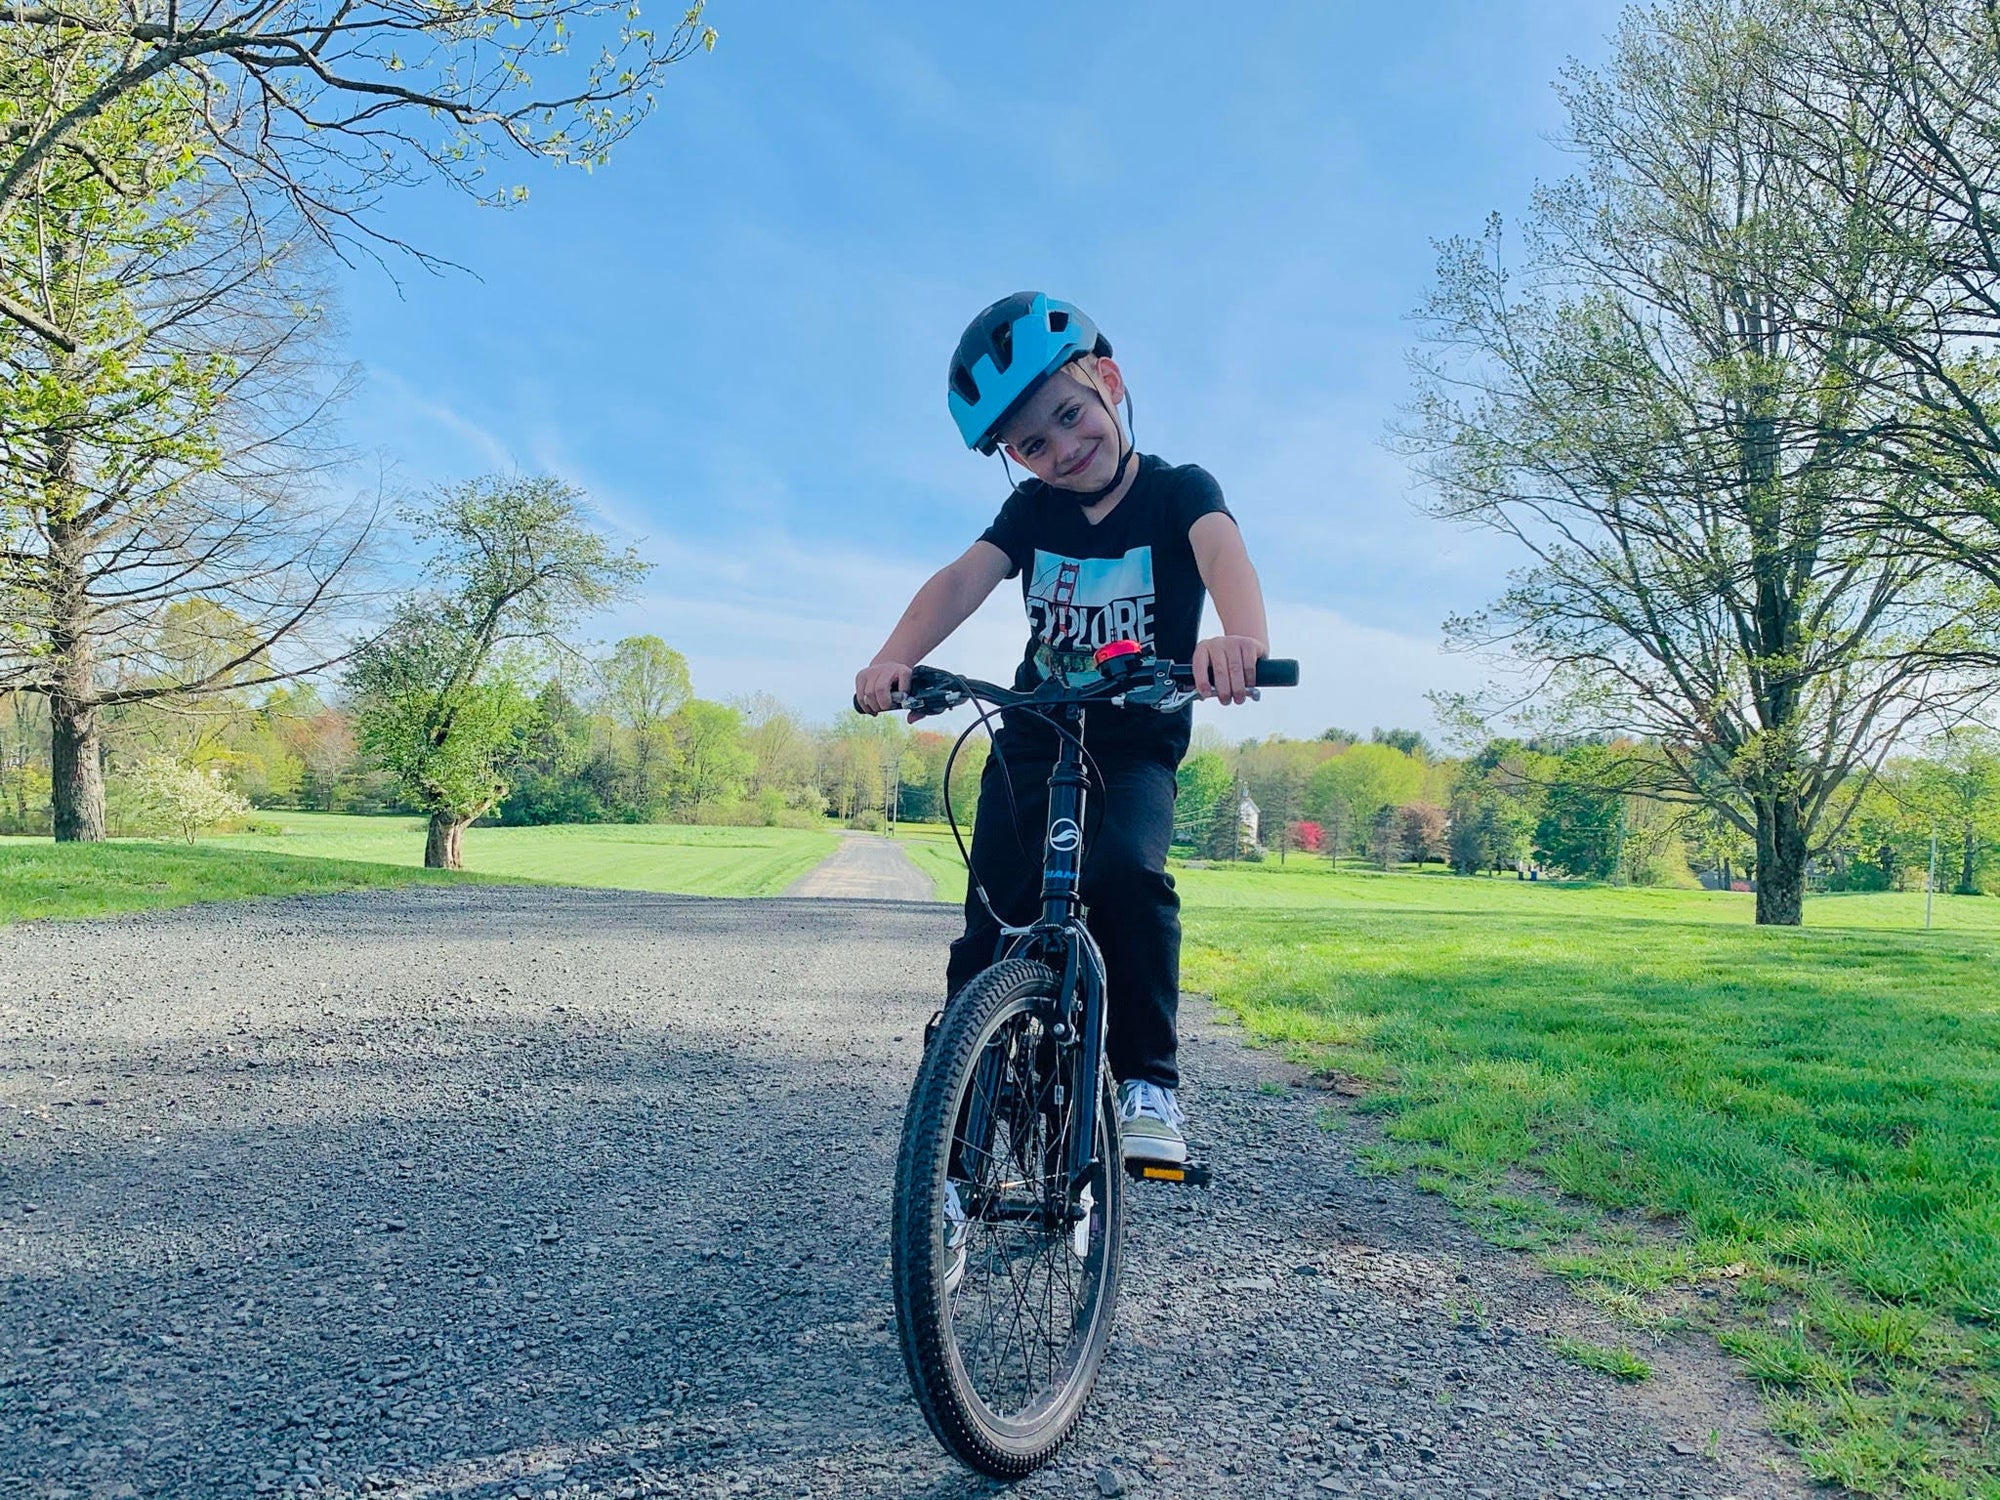 Young kid wearing a Lazer Kids bike helmet while riding his bicycle